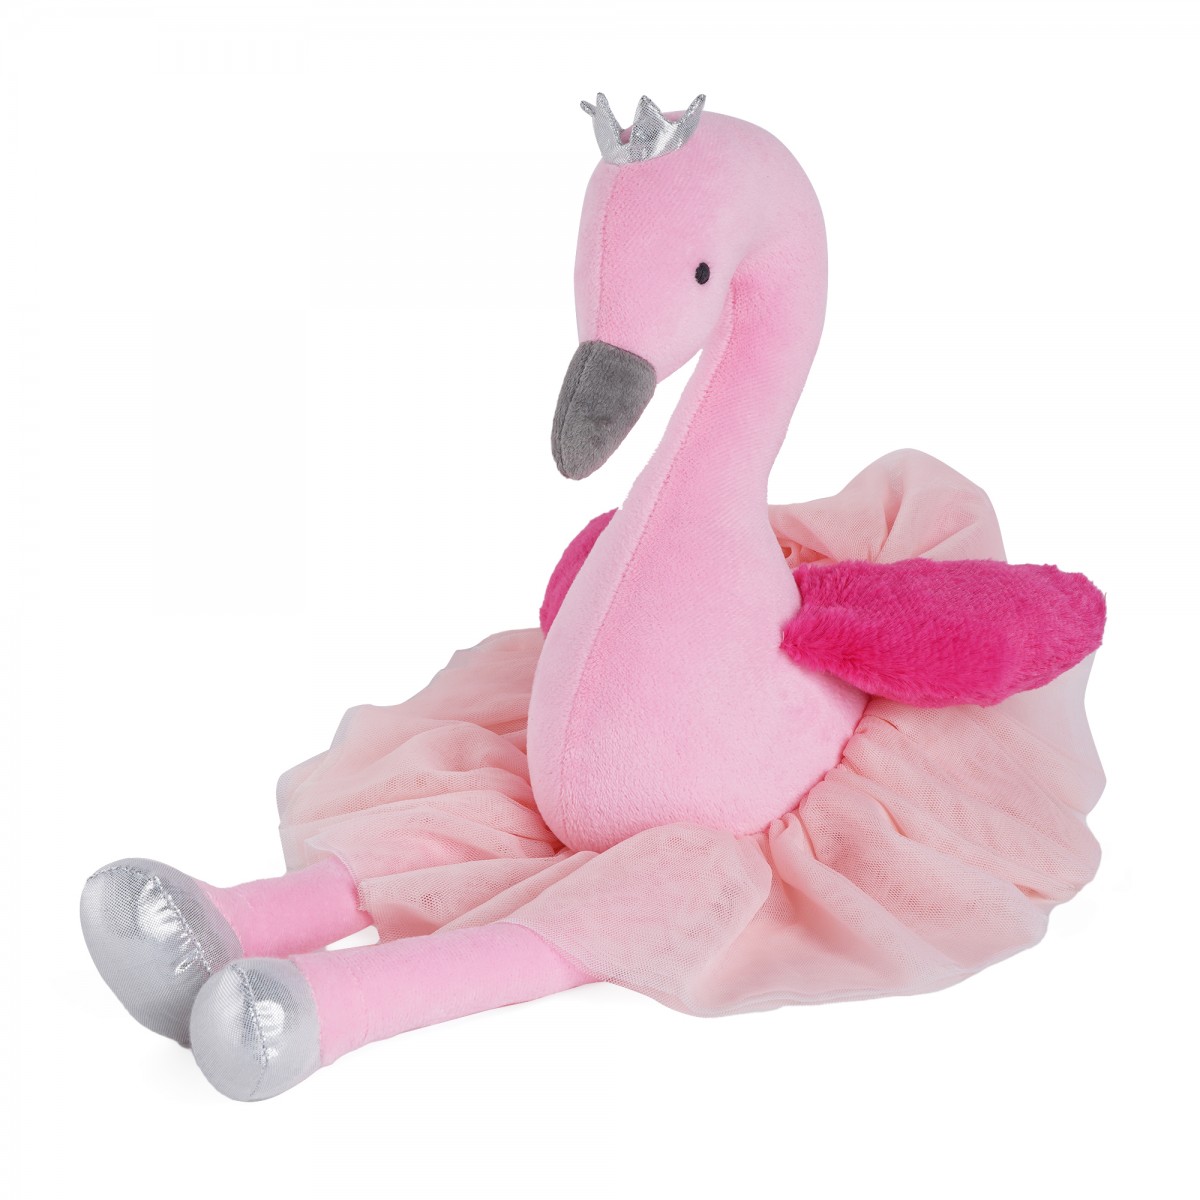 Huggable Cuddly Flamingo Stuffed Toy By Fuzzbuzz, Soft Toys for Kids, Cute Plushies Pink, For Kids Of Age 2 Years & Above